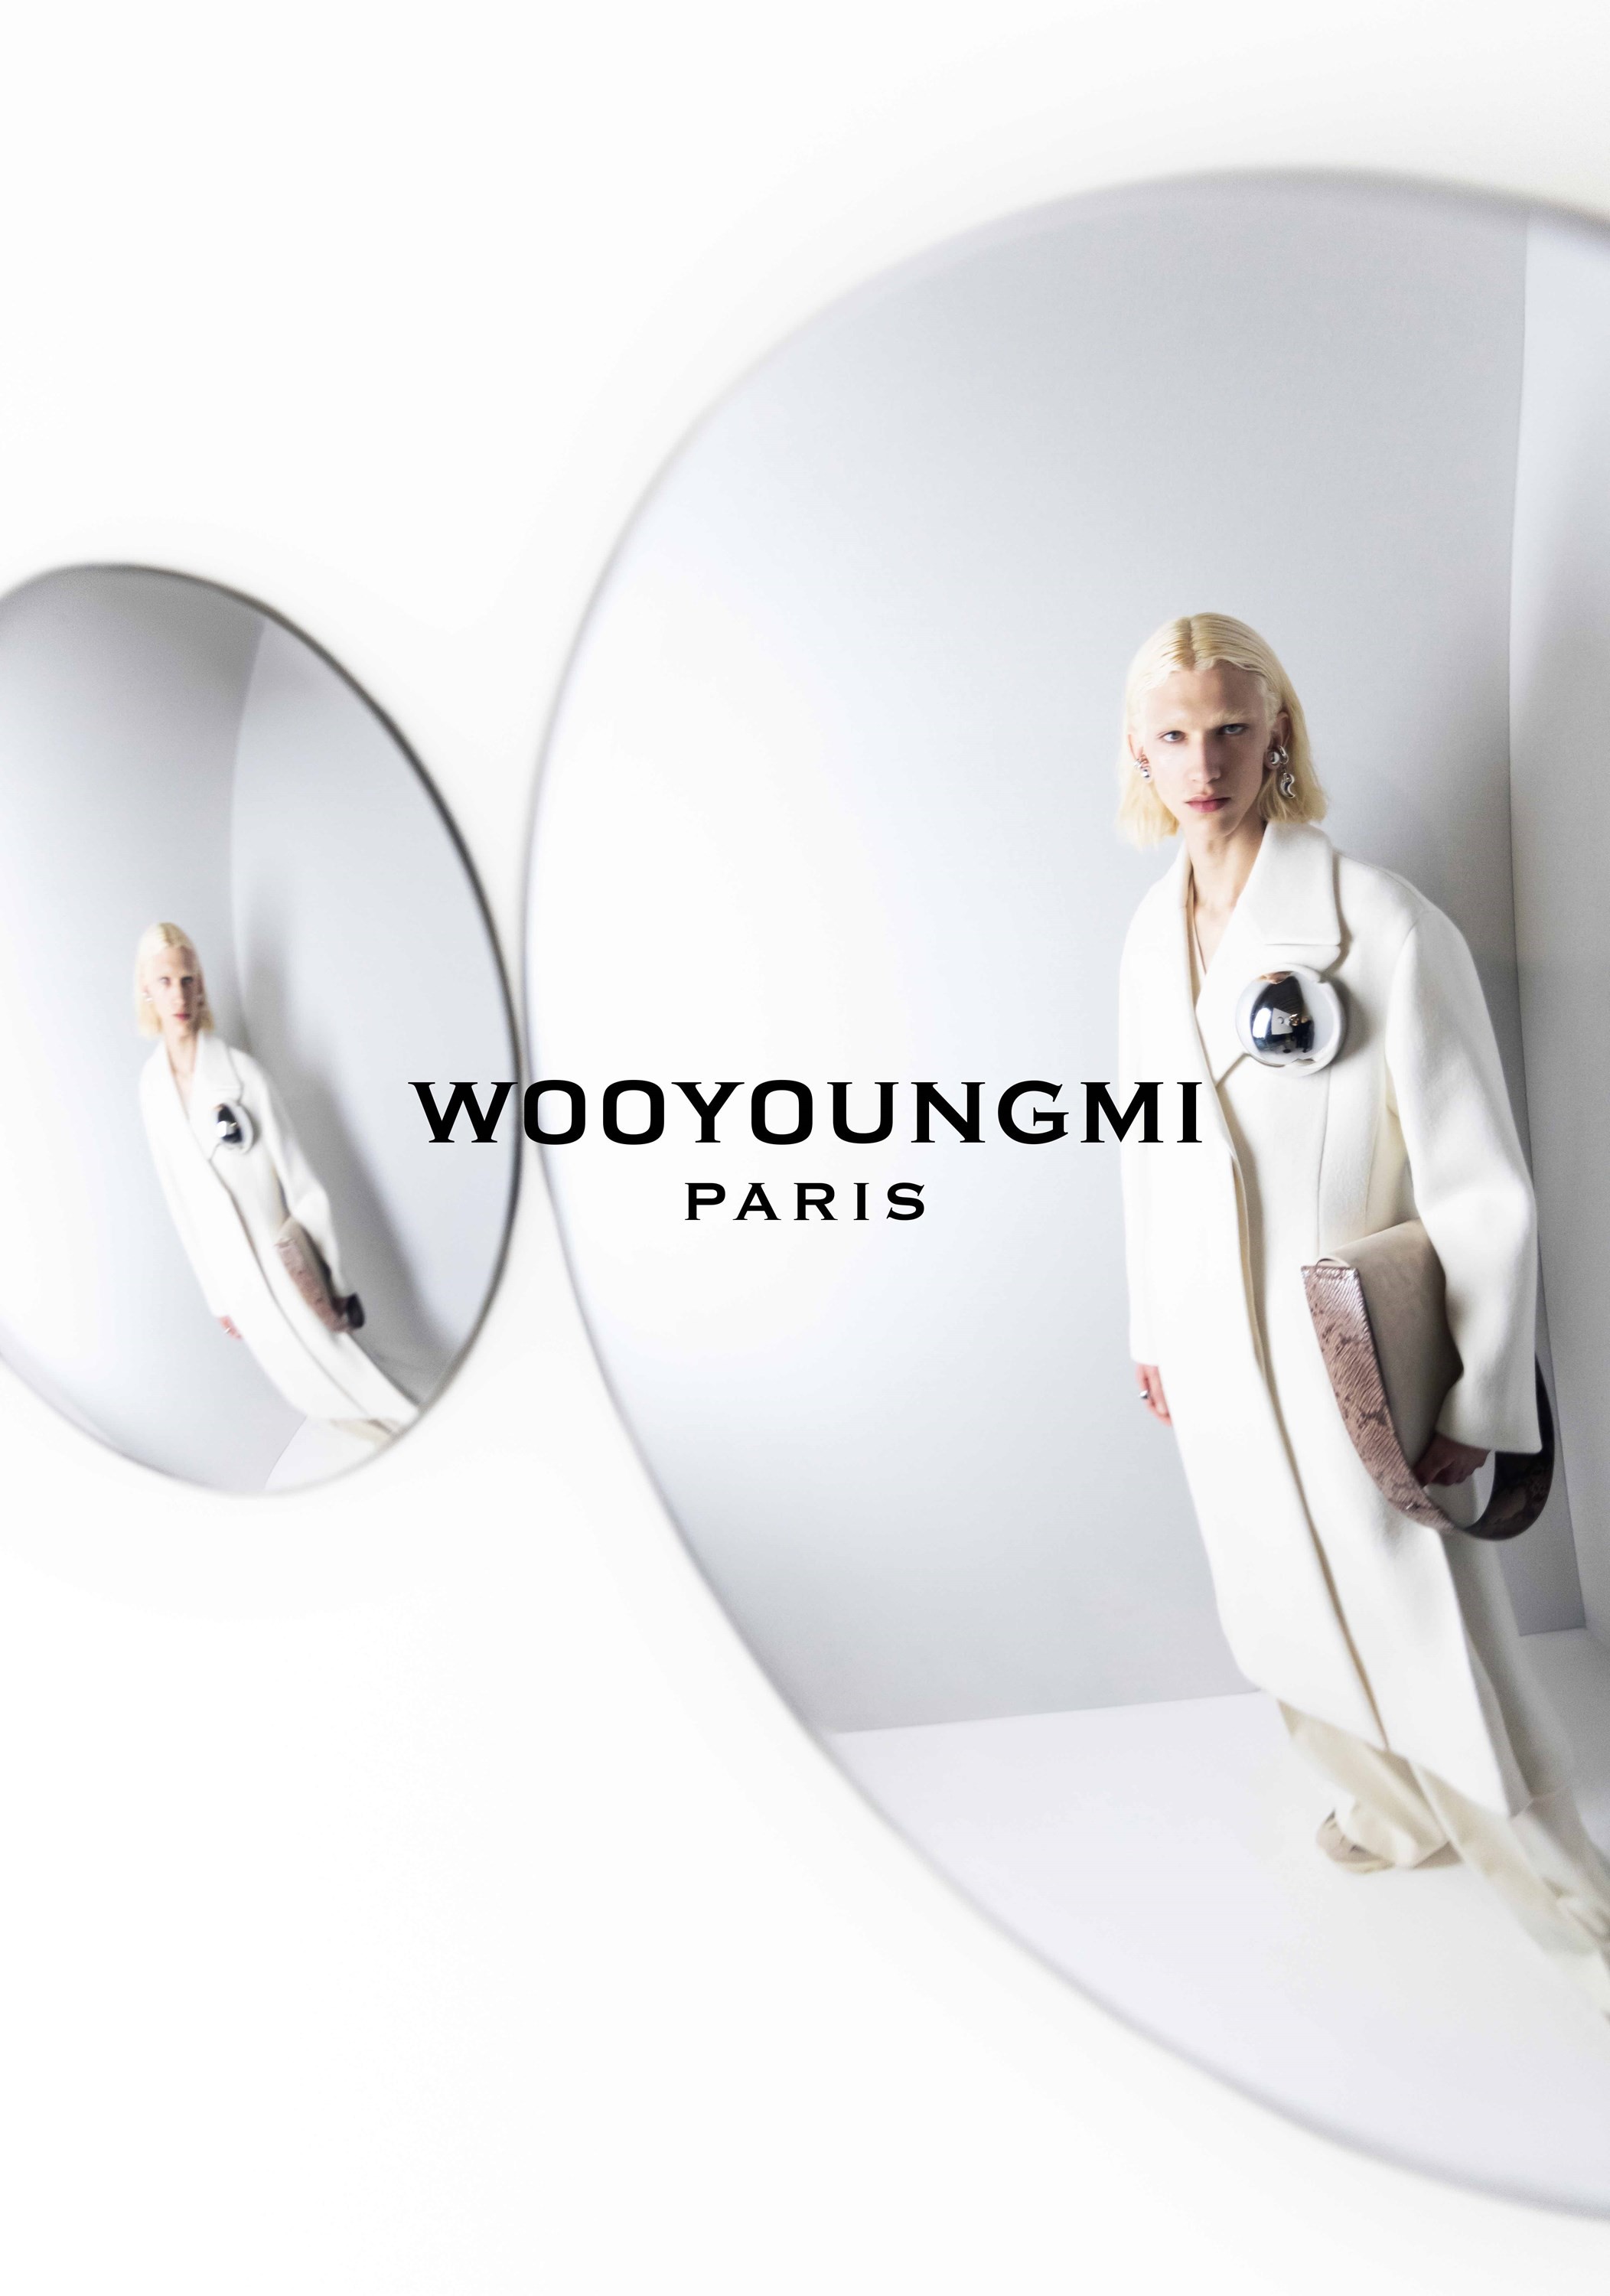 Wooyoungmi Opens It's Second Flagship Store In Paris On Rue Saint-Honoré -  10 Magazine